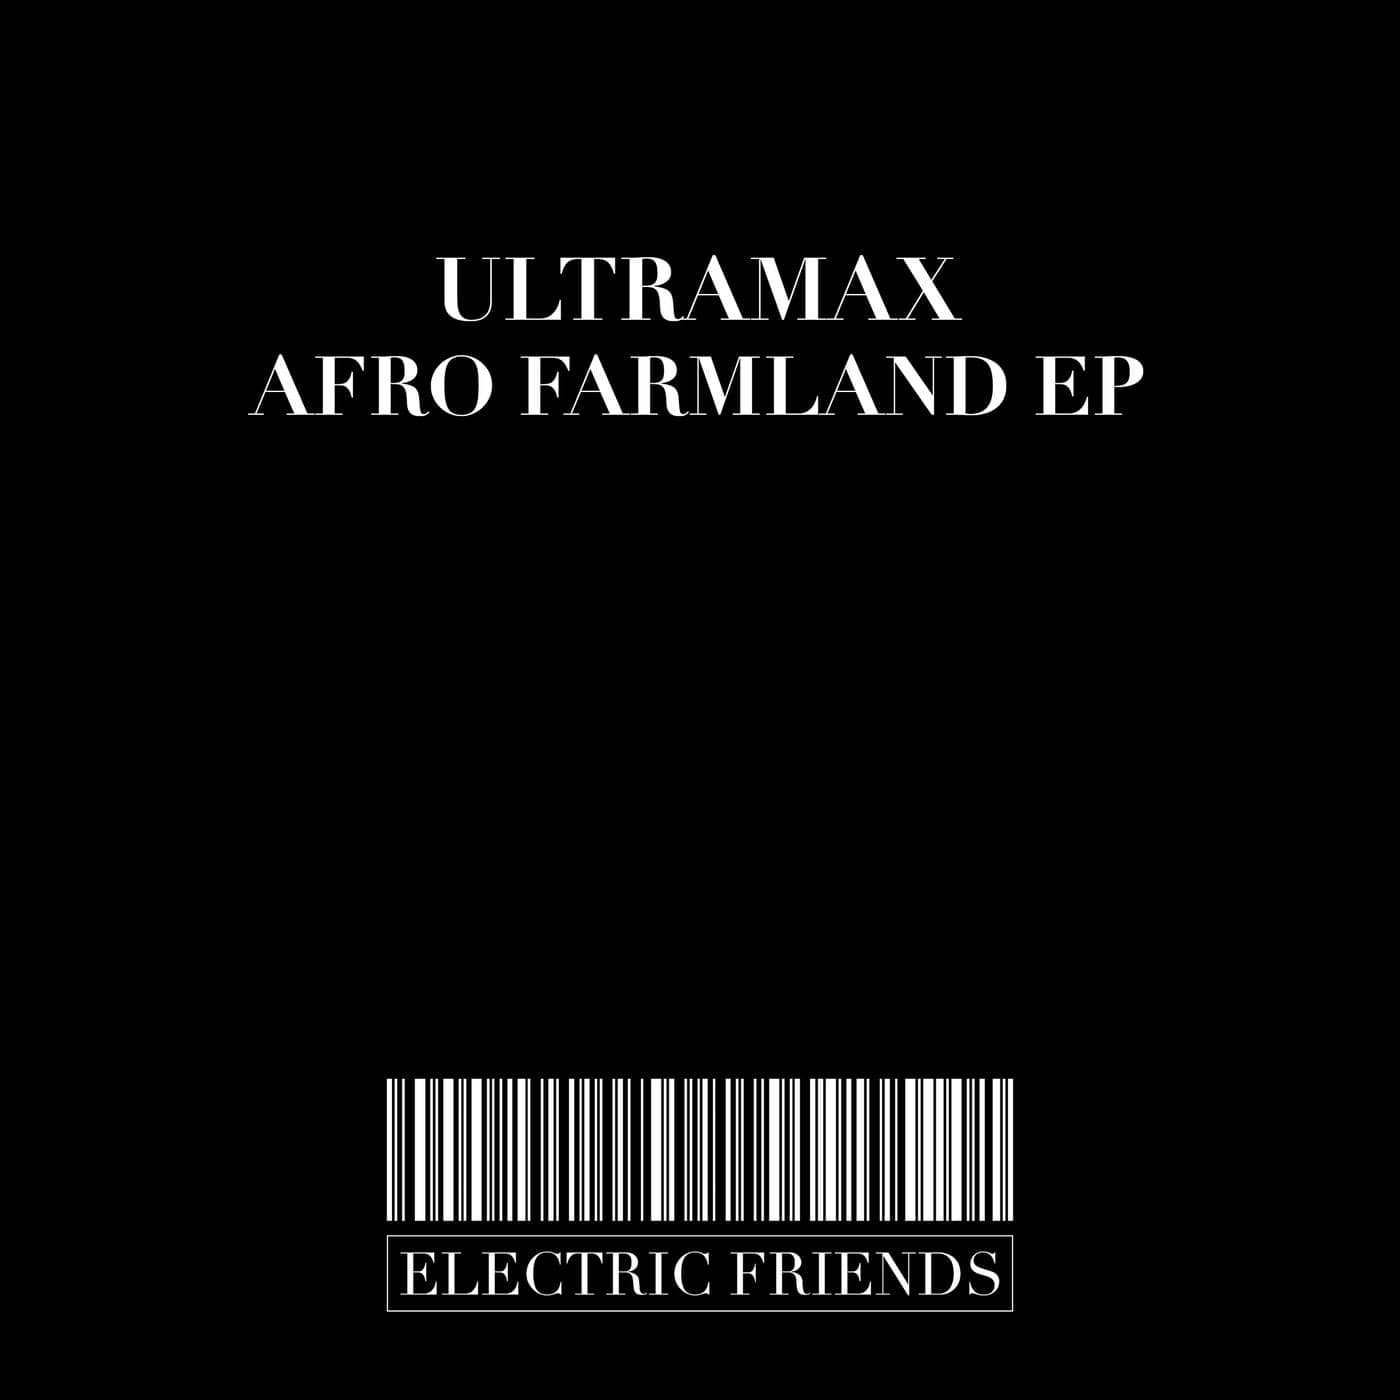 Download Ultramax, Dlalas - Afro Farmland EP on Electrobuzz